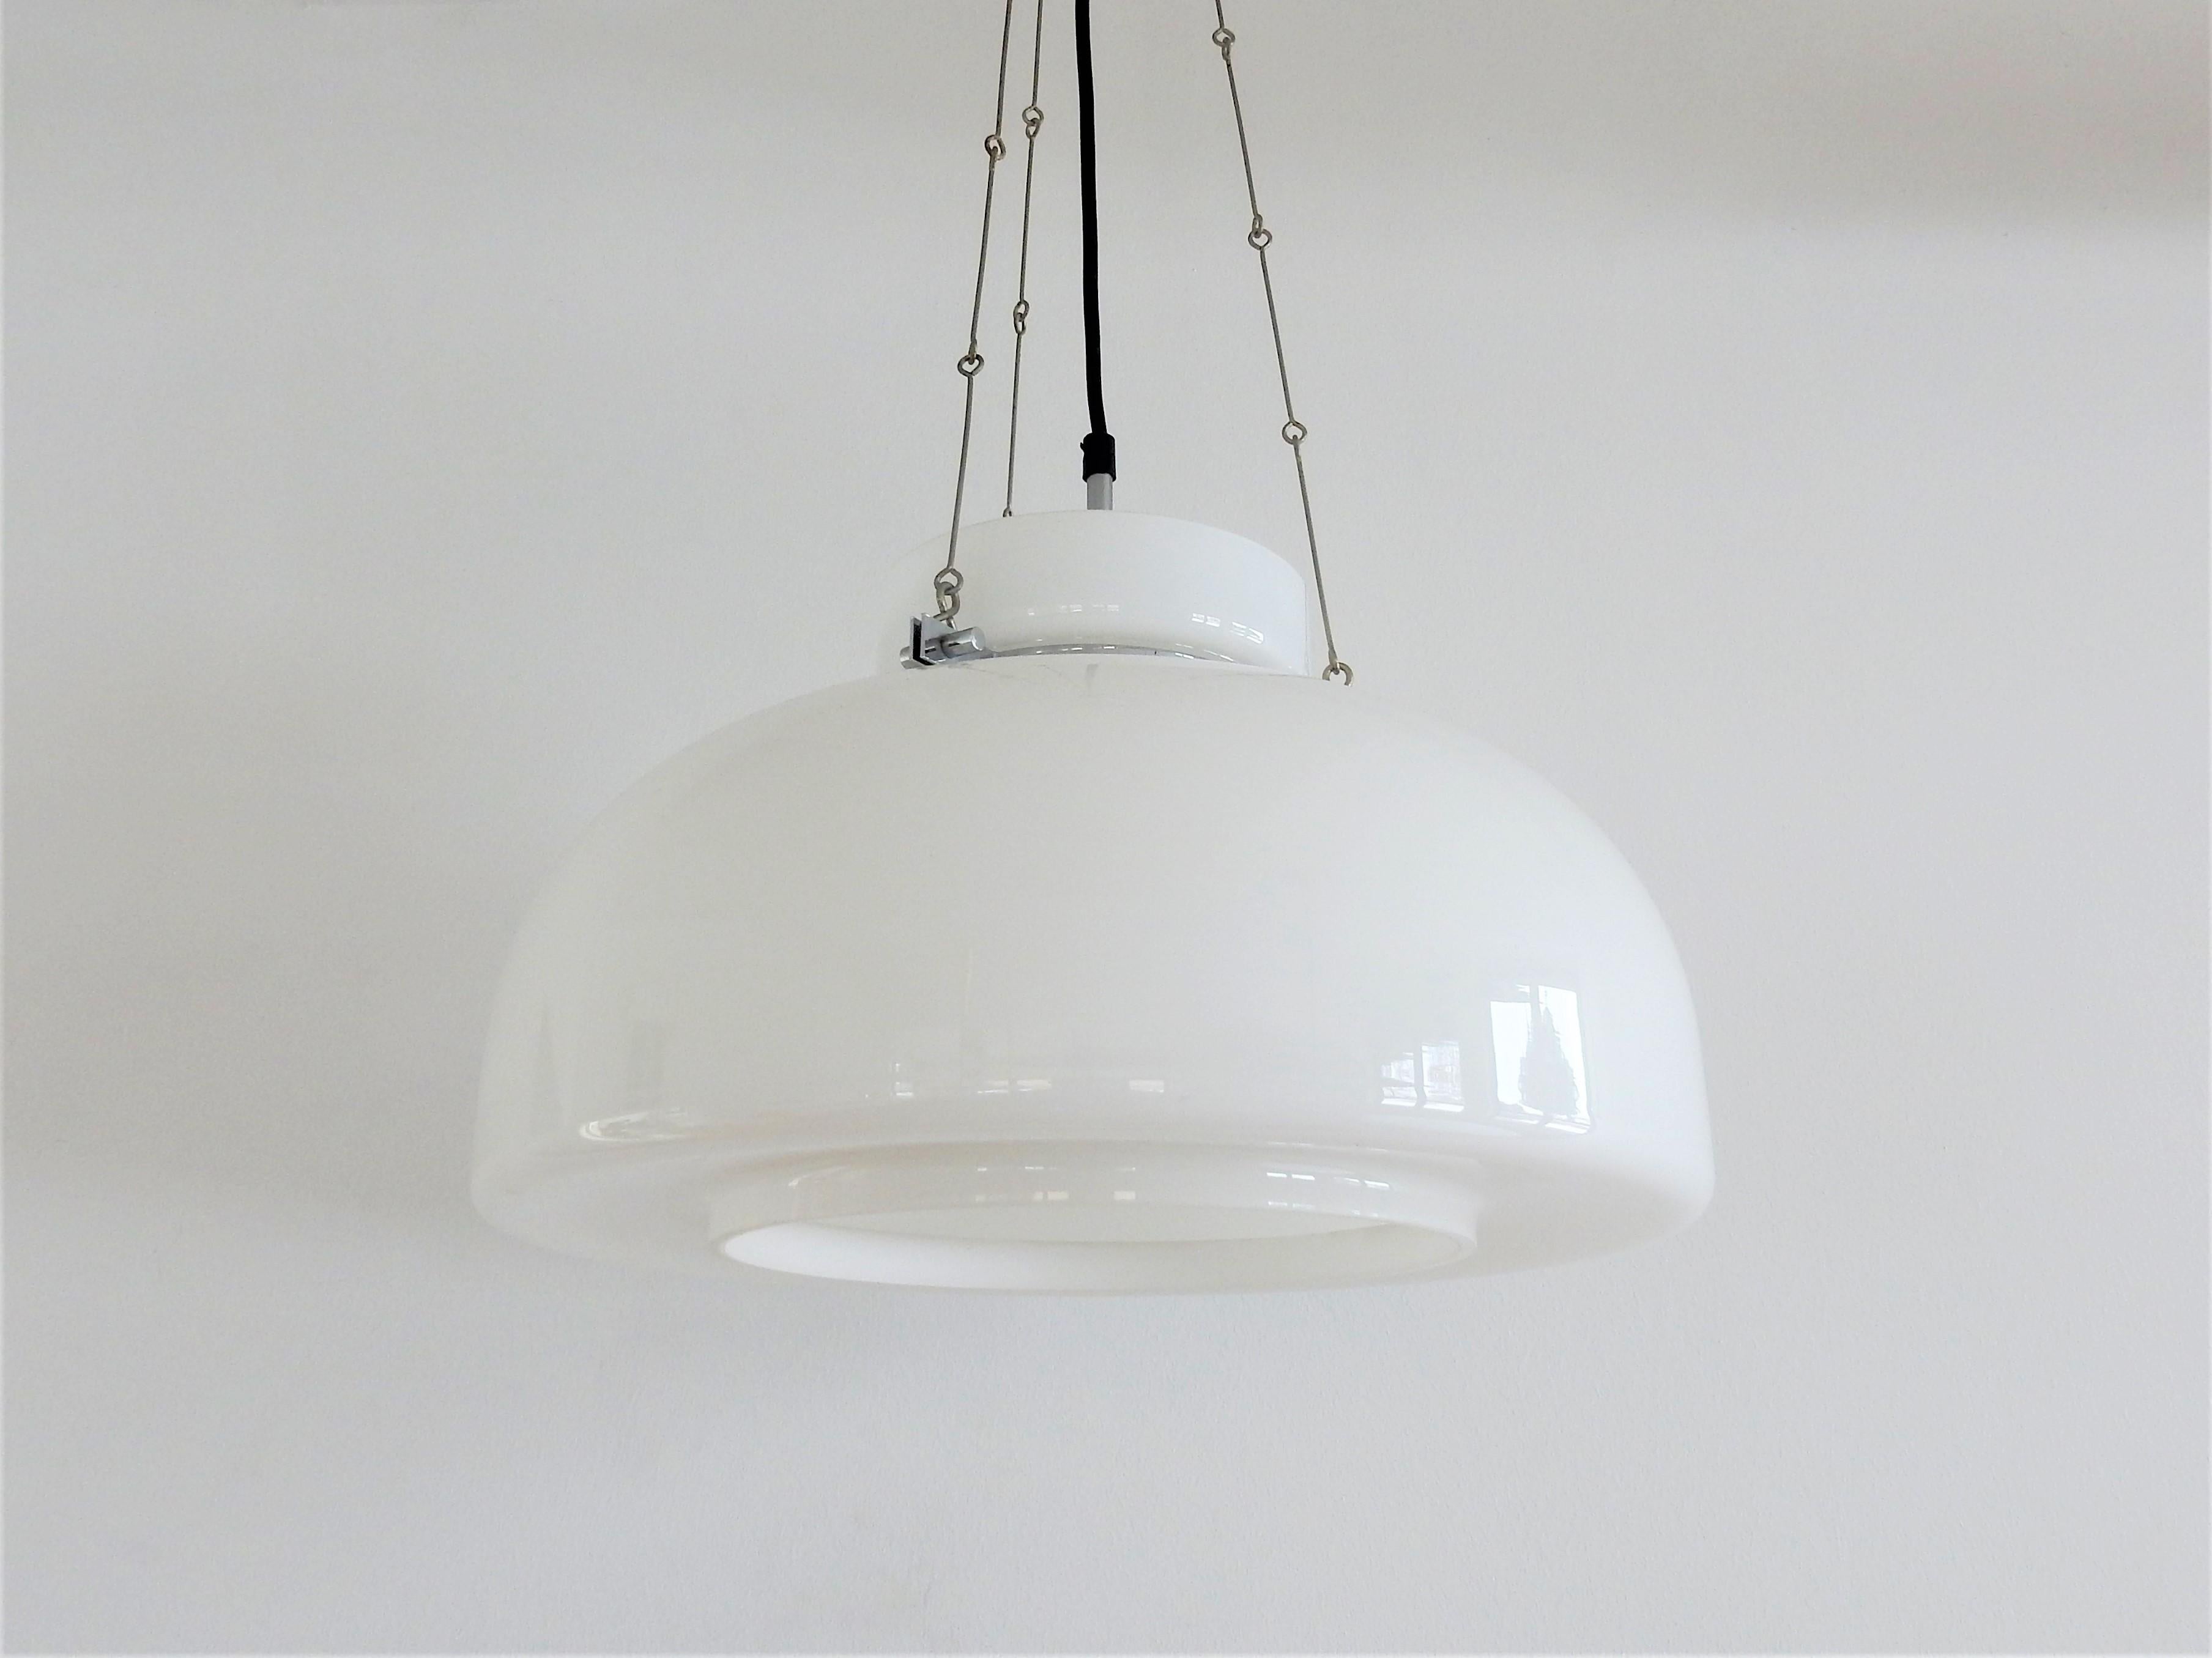 This quite rare pendant lamp was designed by Herbert Proft for Glashütte Limburg in Germany in the 1970s. It has a white and opaline glass shade, a chromed ring with 3 connecting screws, hanging on three chains. The white glass gives a nice and soft